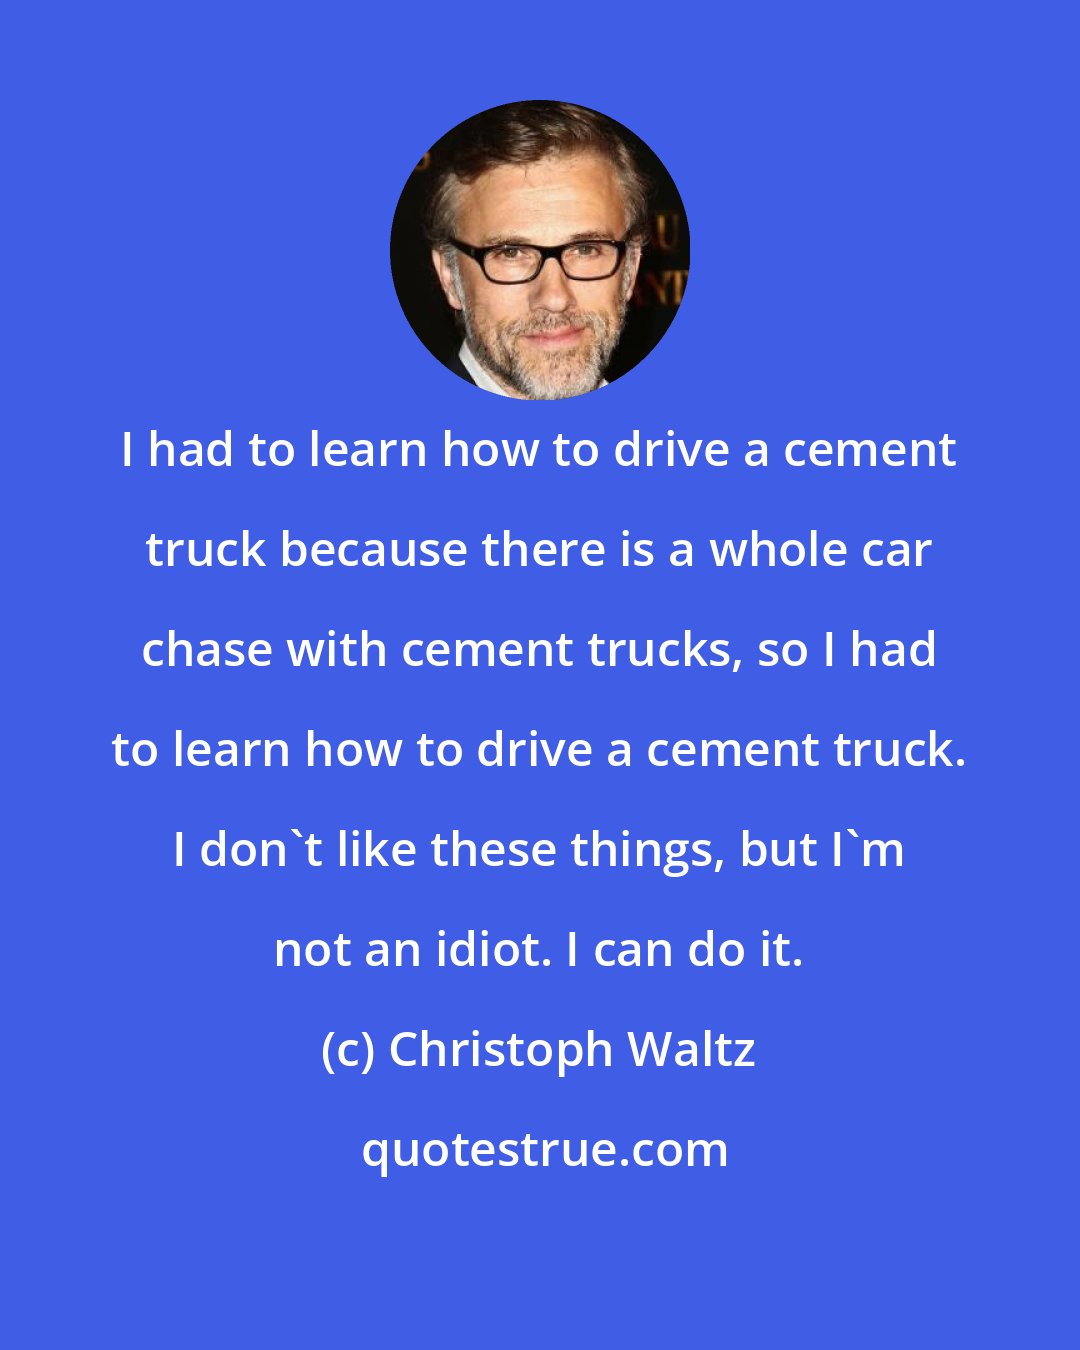 Christoph Waltz: I had to learn how to drive a cement truck because there is a whole car chase with cement trucks, so I had to learn how to drive a cement truck. I don't like these things, but I'm not an idiot. I can do it.